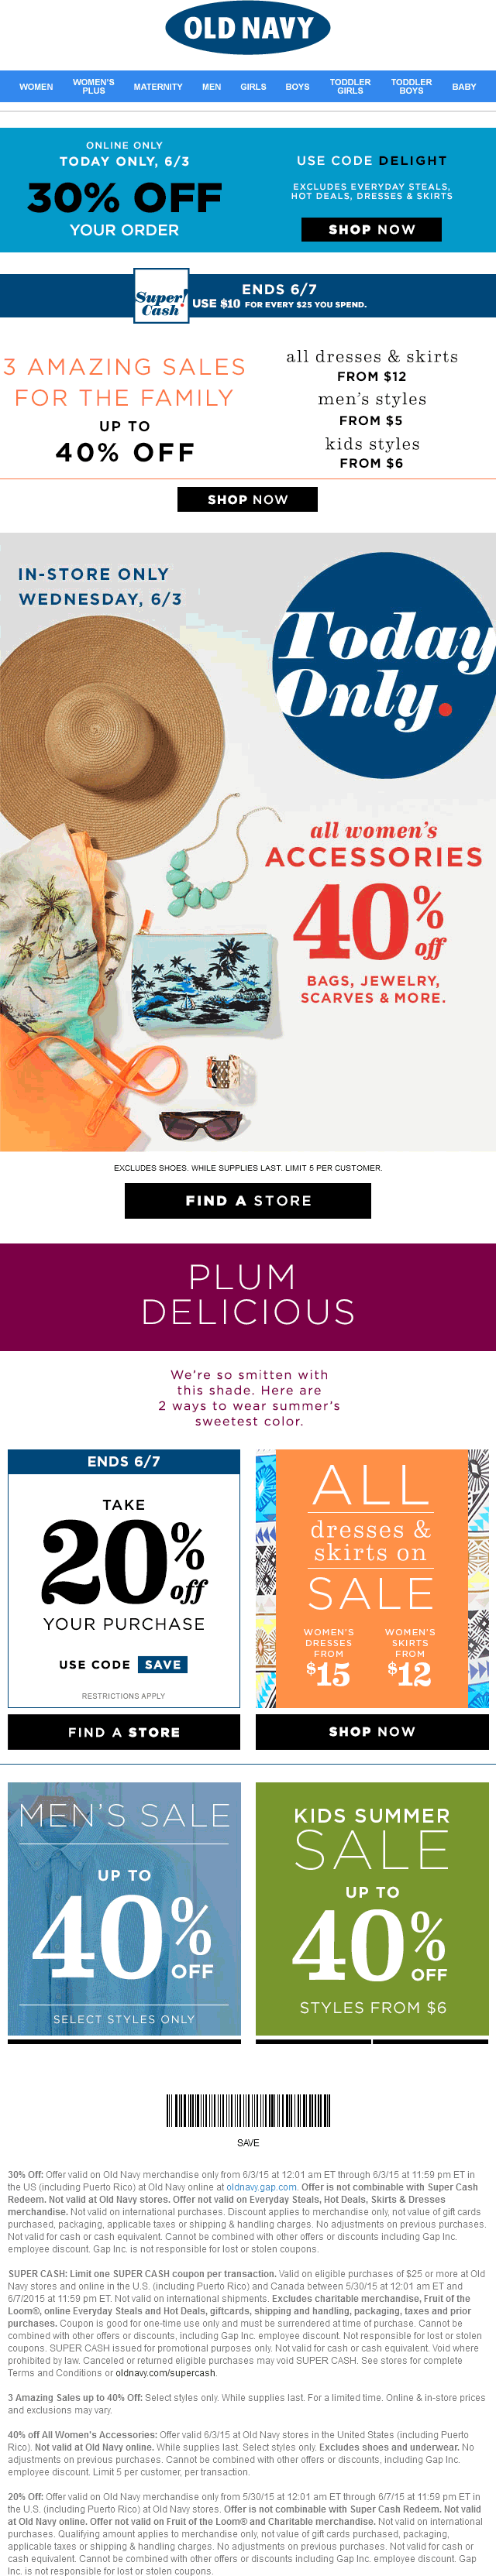 Old Navy Coupon April 2024 40% off womens accessories at Old Navy, or 30% off the tab online via promo code DELIGHT